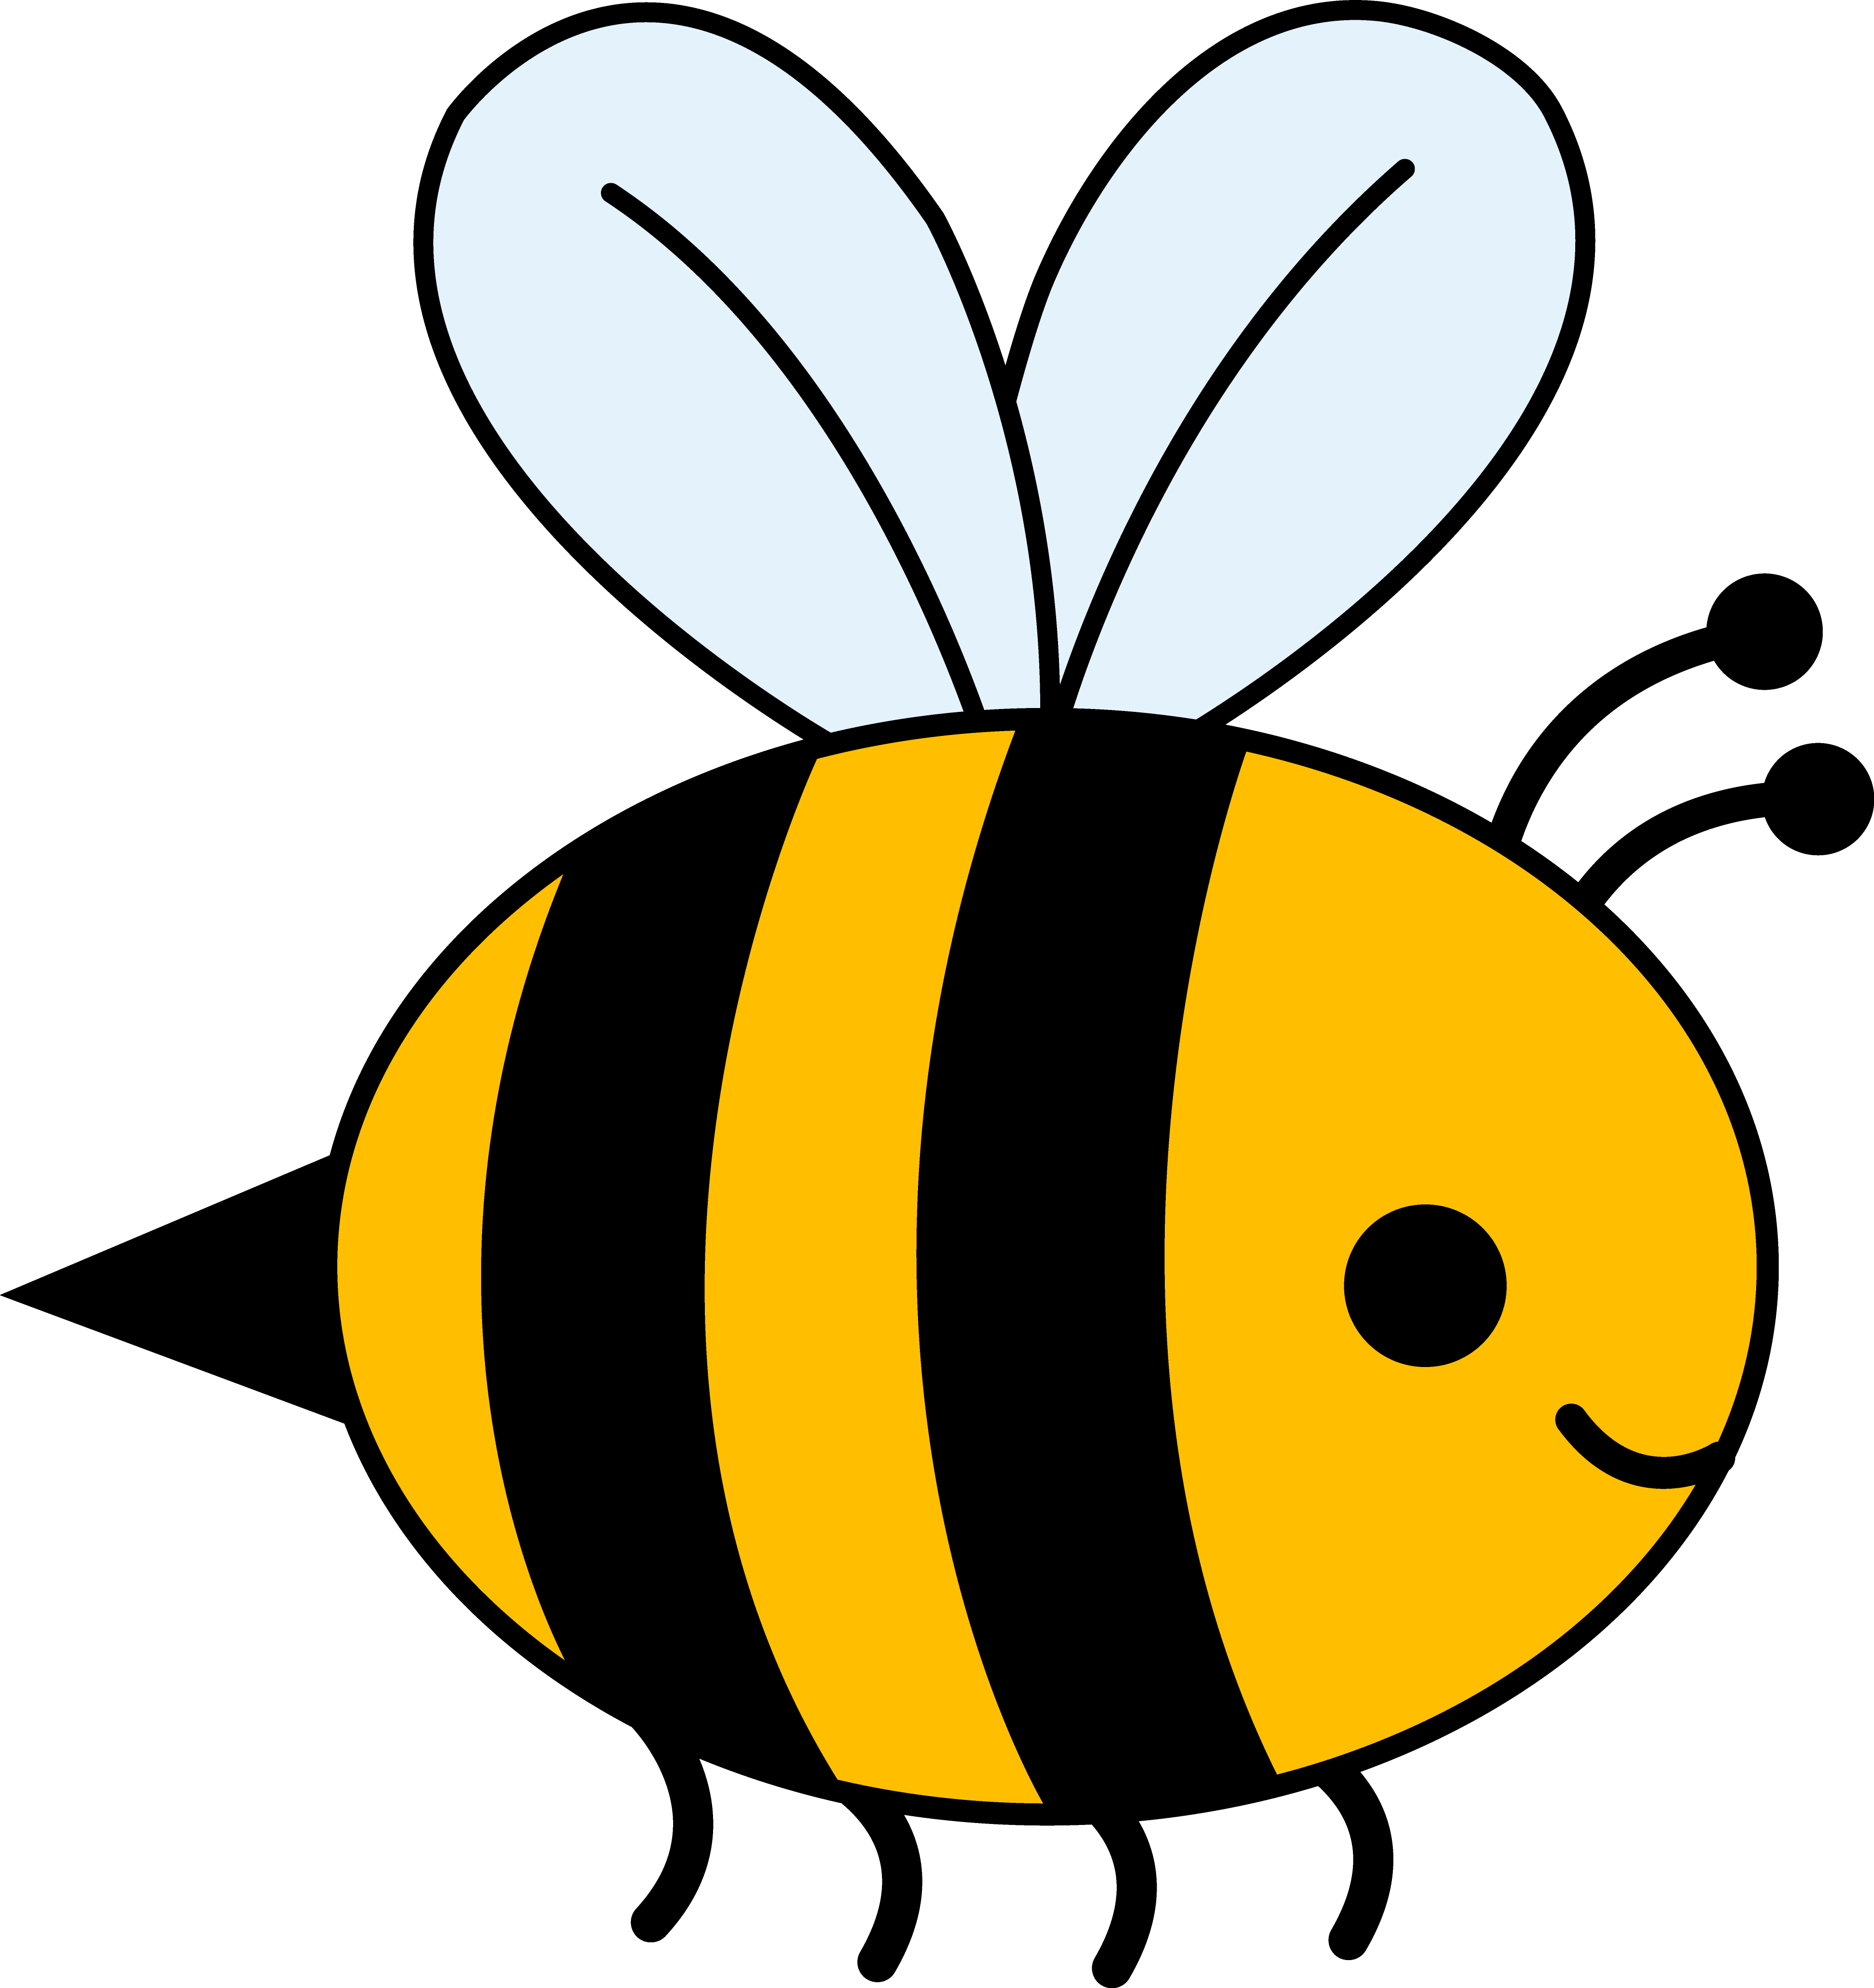 Animated Bumble Bee - ClipArt Best